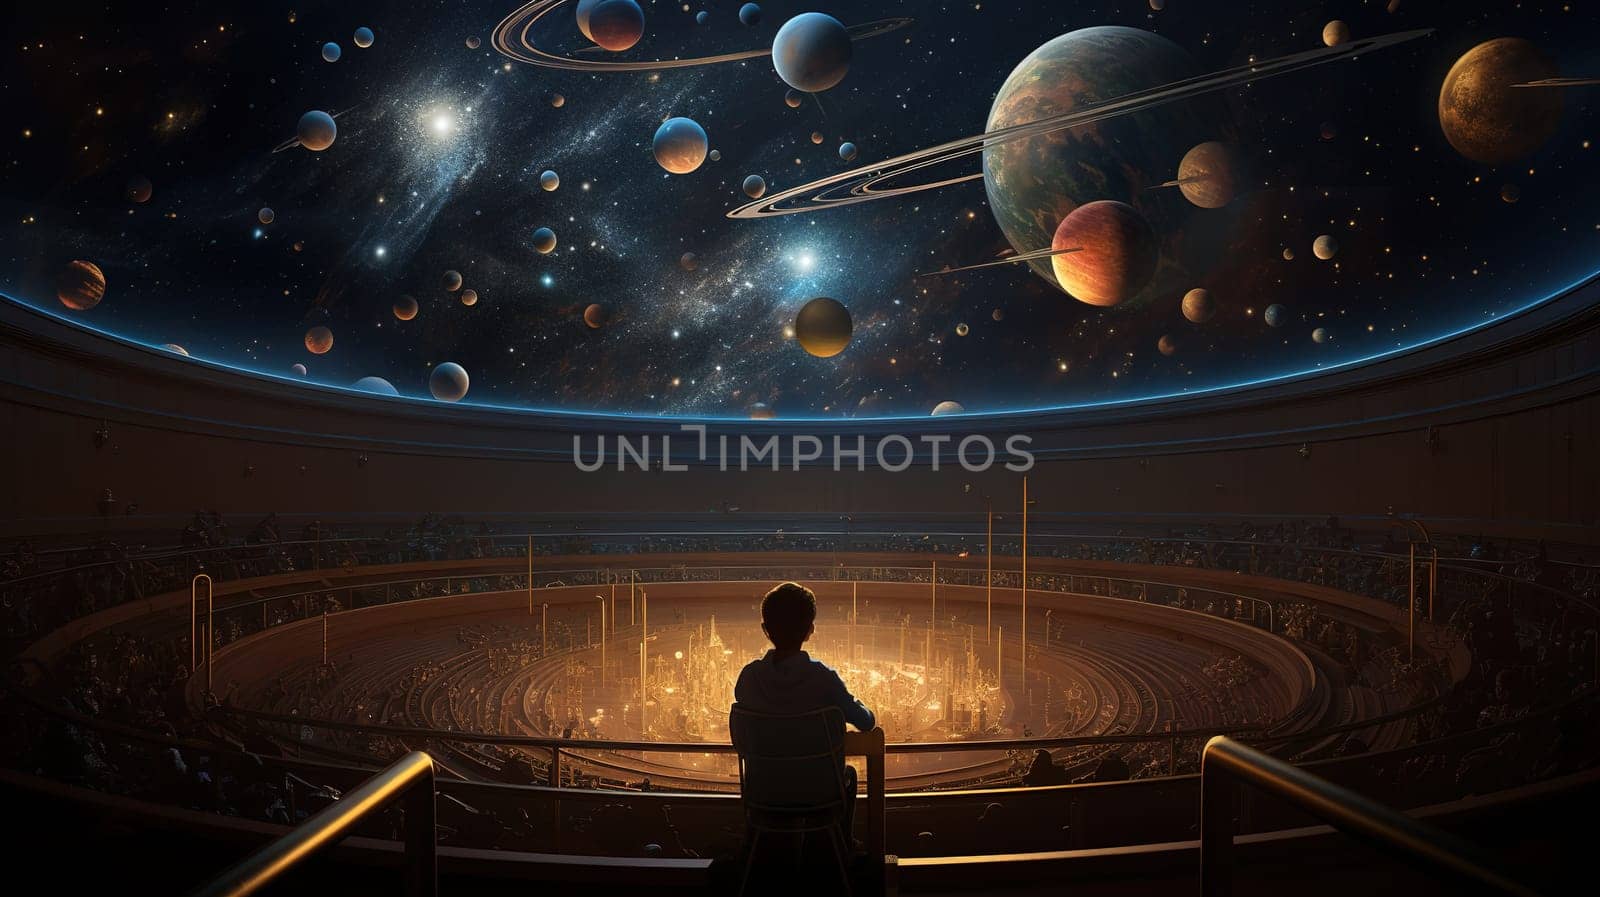 Modern planetarium with projection of the planets and stars of the solar system, astrology concept